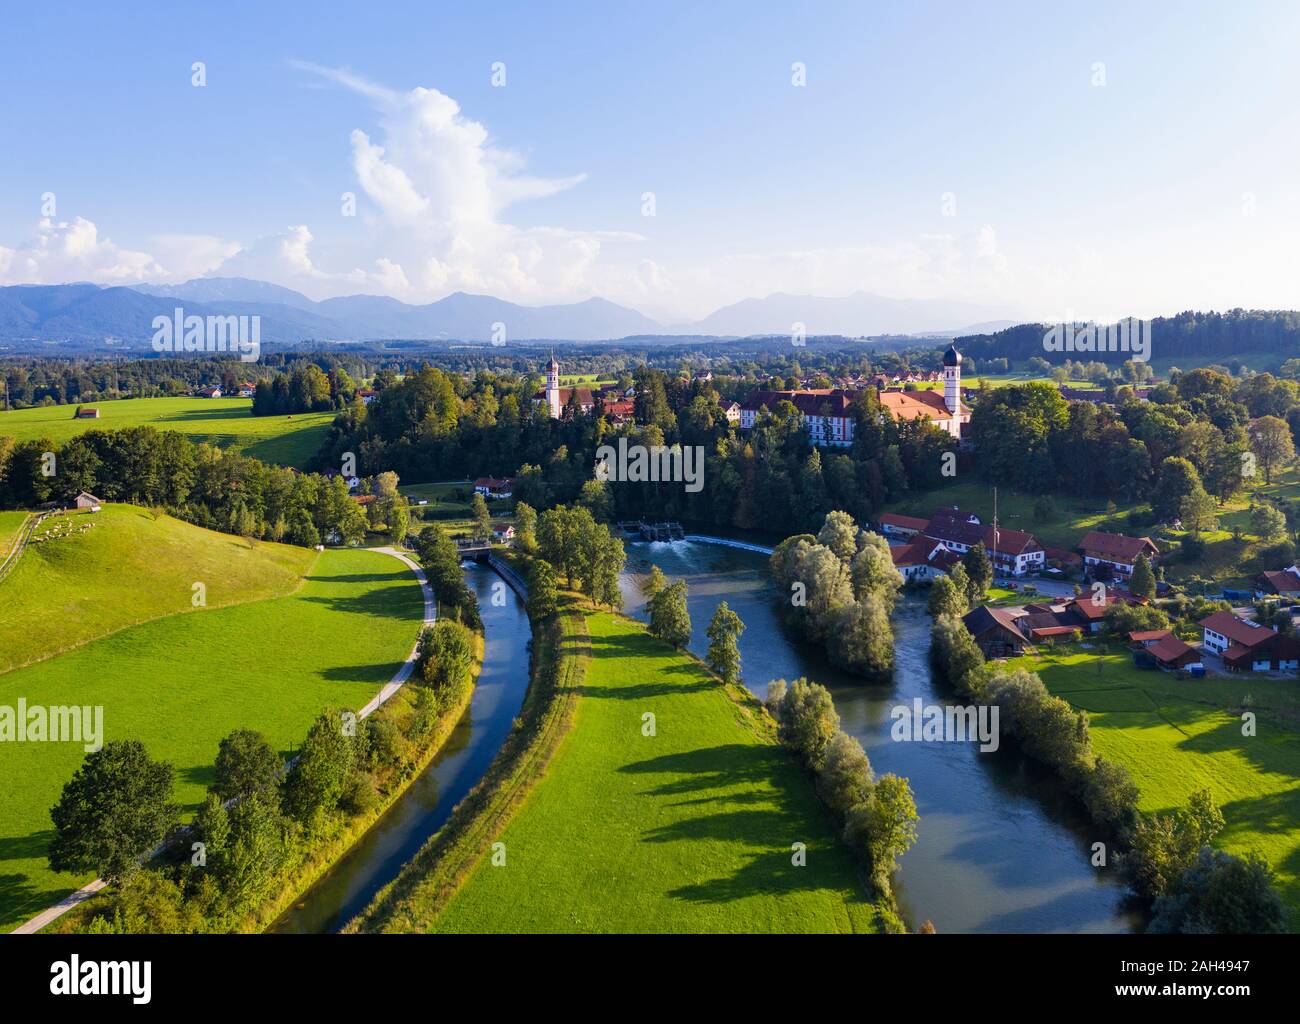 Germany, Bavaria, Eurasburg, Aerial view of Loisach river and countryside town Stock Photo